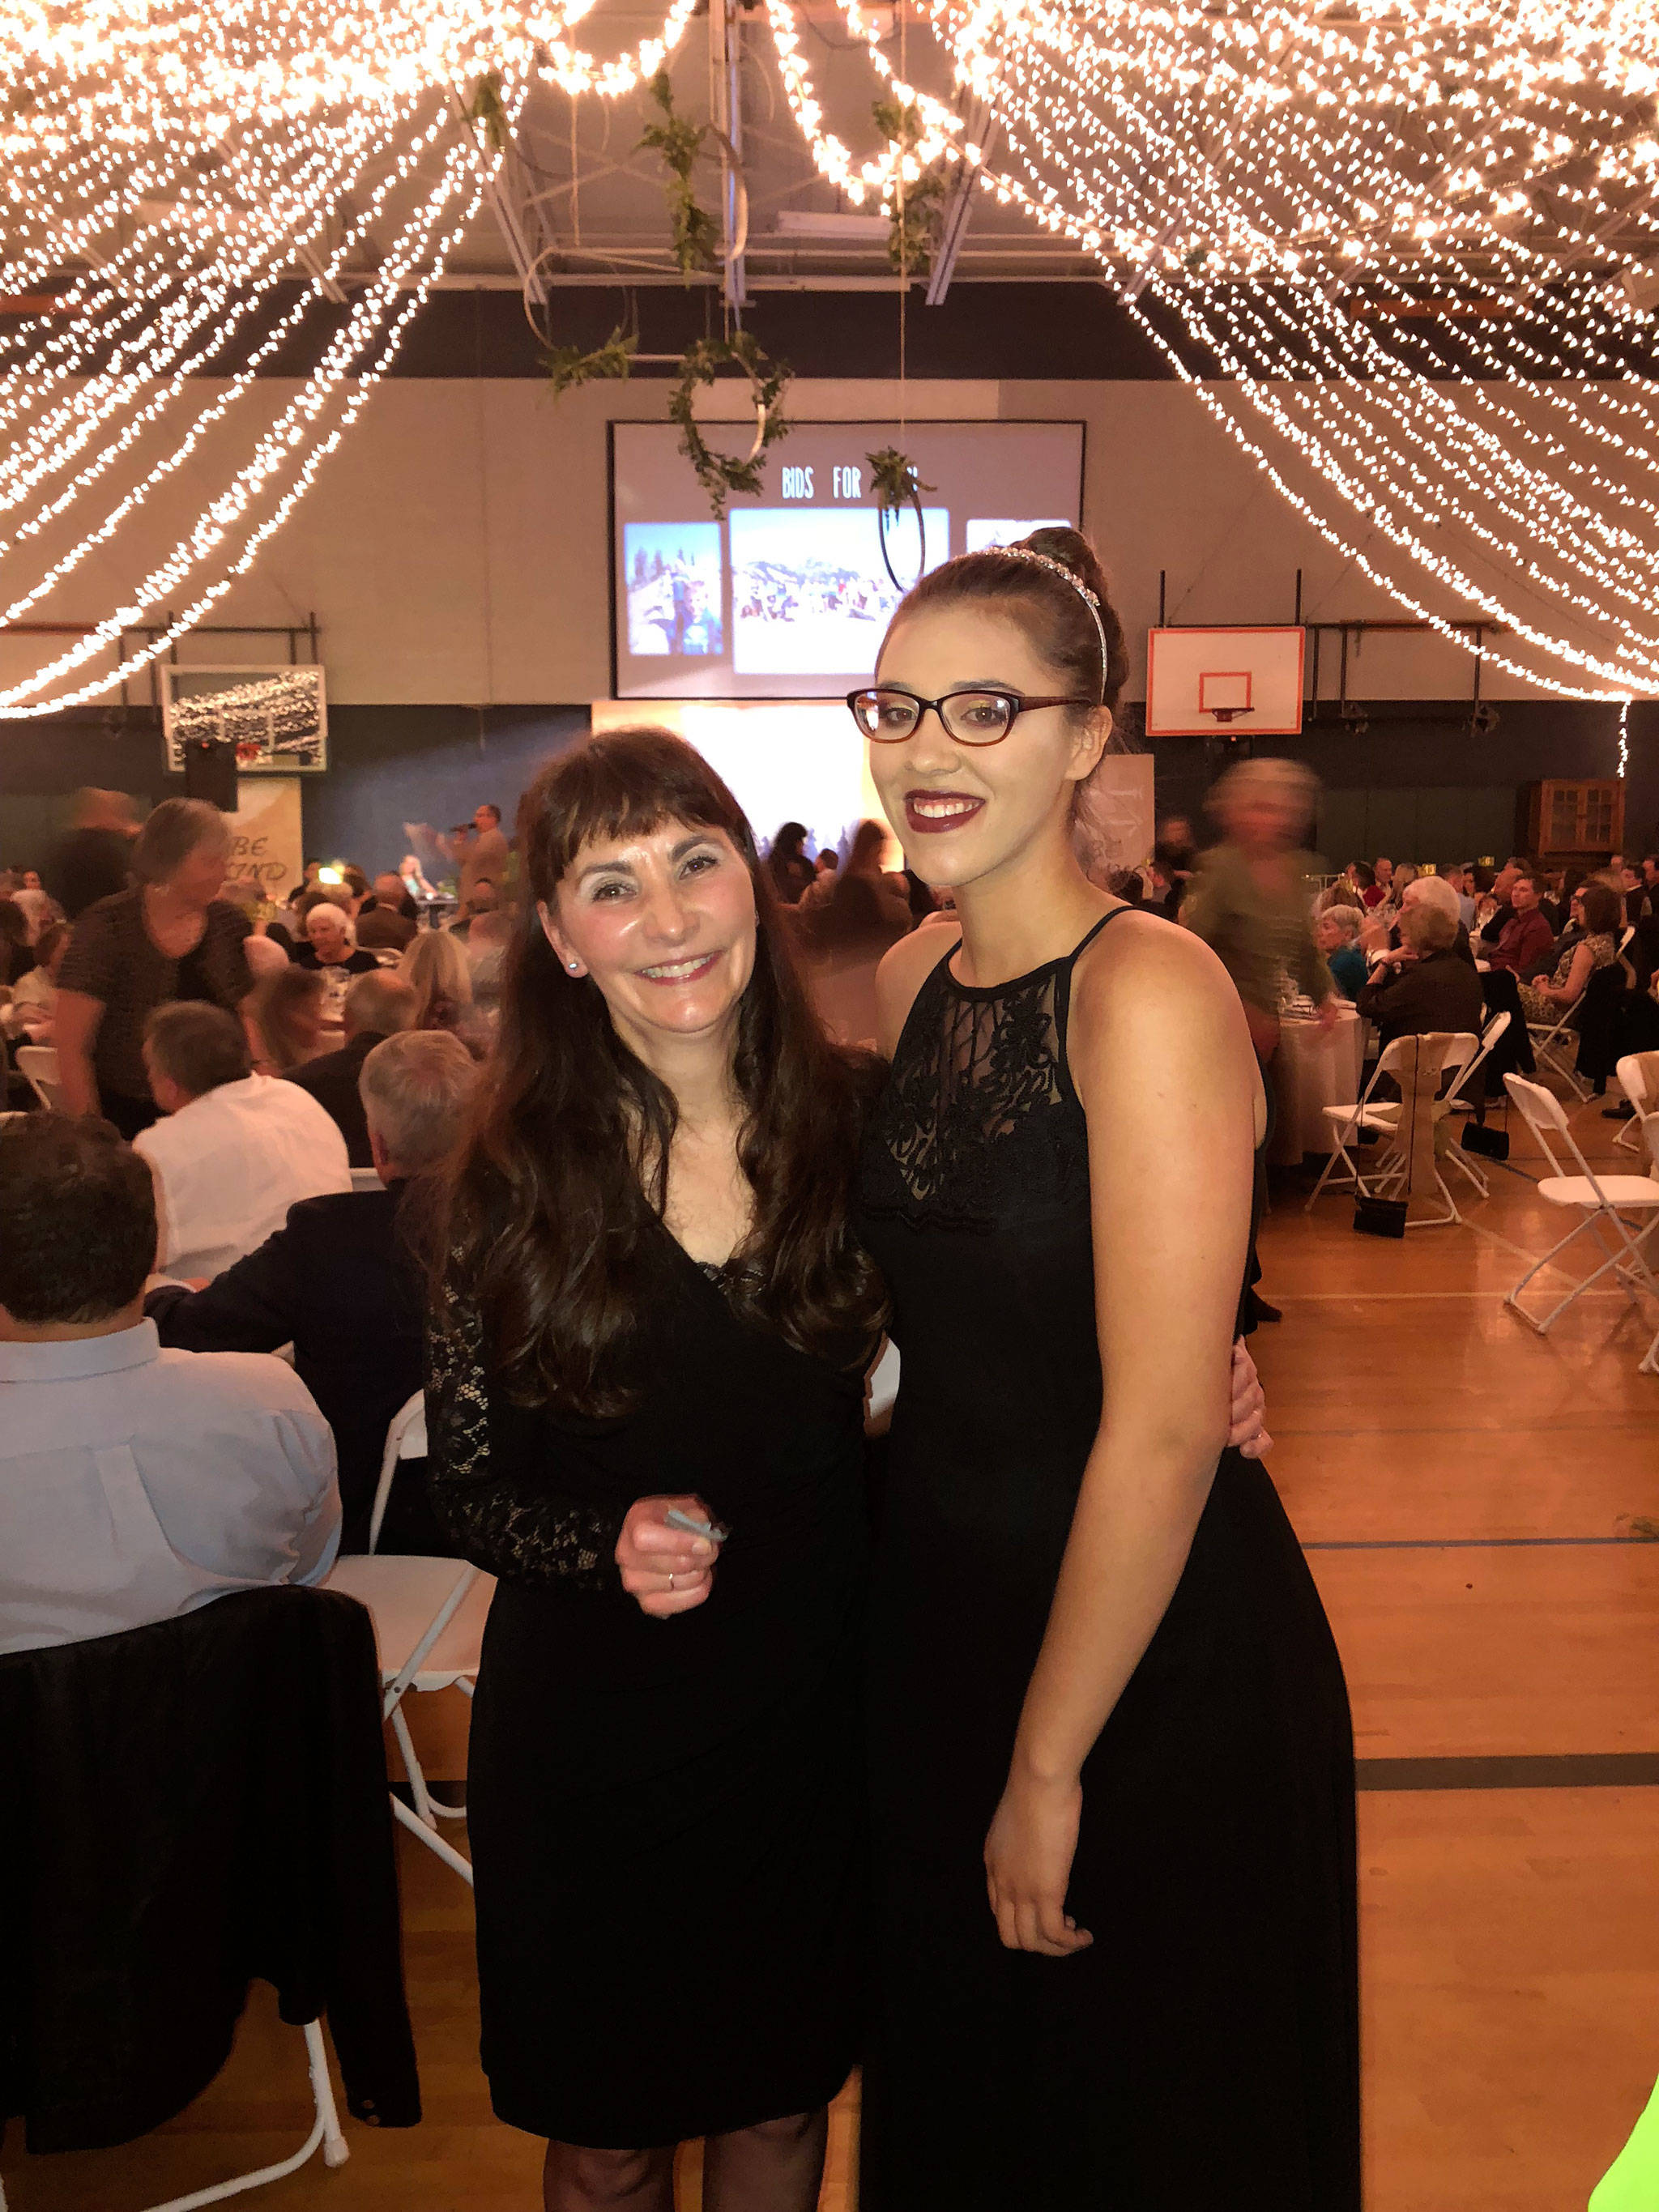 Mary Budke, executive director of the Boys & Girls Clubs of the Olympic Peninsula, stands with 15-year-old Pursha True of the Port Angeles club on Nov. 10 during the clubs’ 30th auction. The clubs raised a record $326,000 for operations. Photo courtesy of Boys & Girls Clubs of the Olympic Peninsula